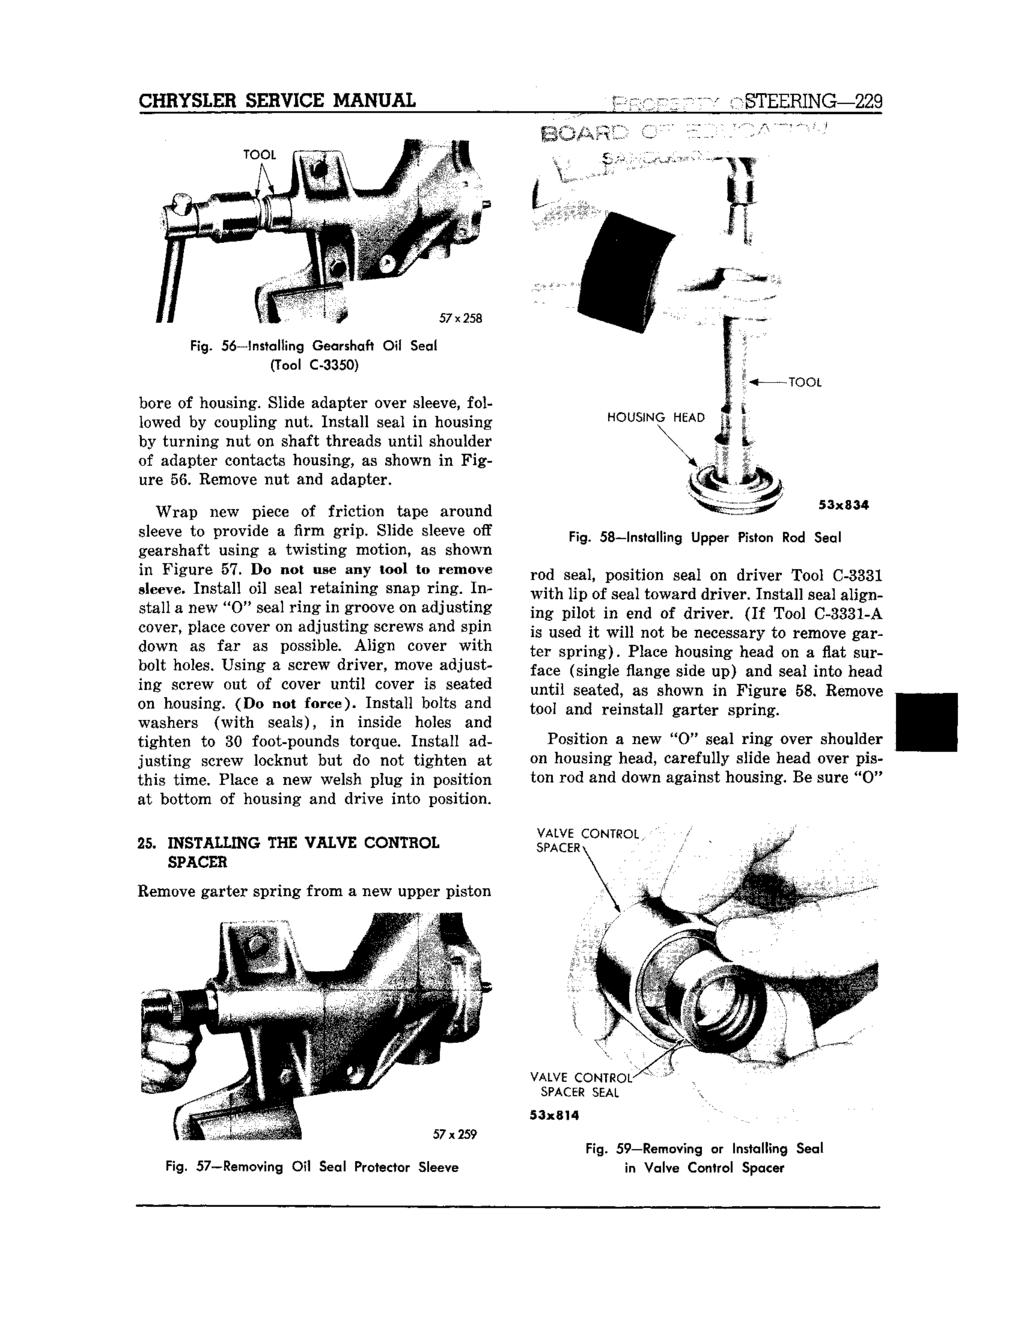 CHRYSLER SERVICE MANUAL STEERING 229 Fig. 56 Installing Gearshaft Oil Seal (Tool C-3350) bore of housing. Slide adapter over sleeve, followed by coupling nut.